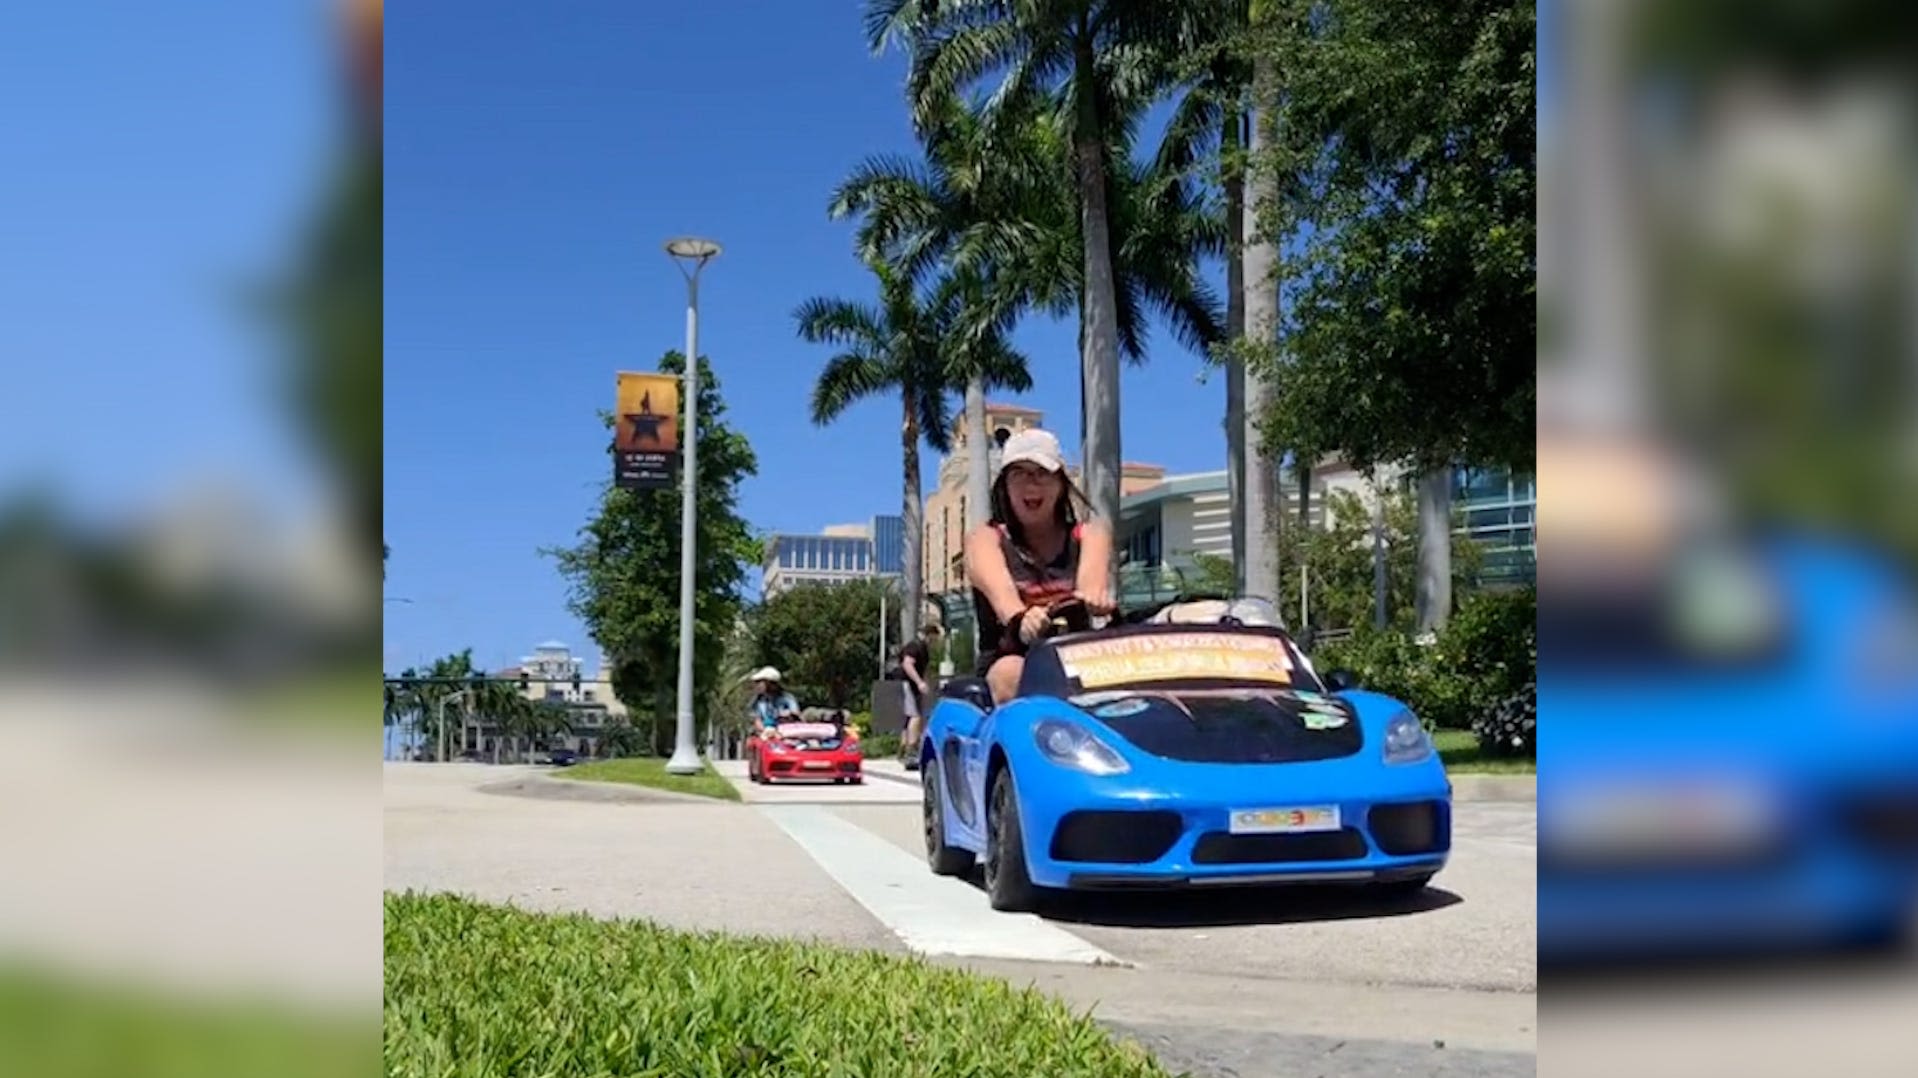 Two women attempt to drive from Jacksonville to Key West in toy cars